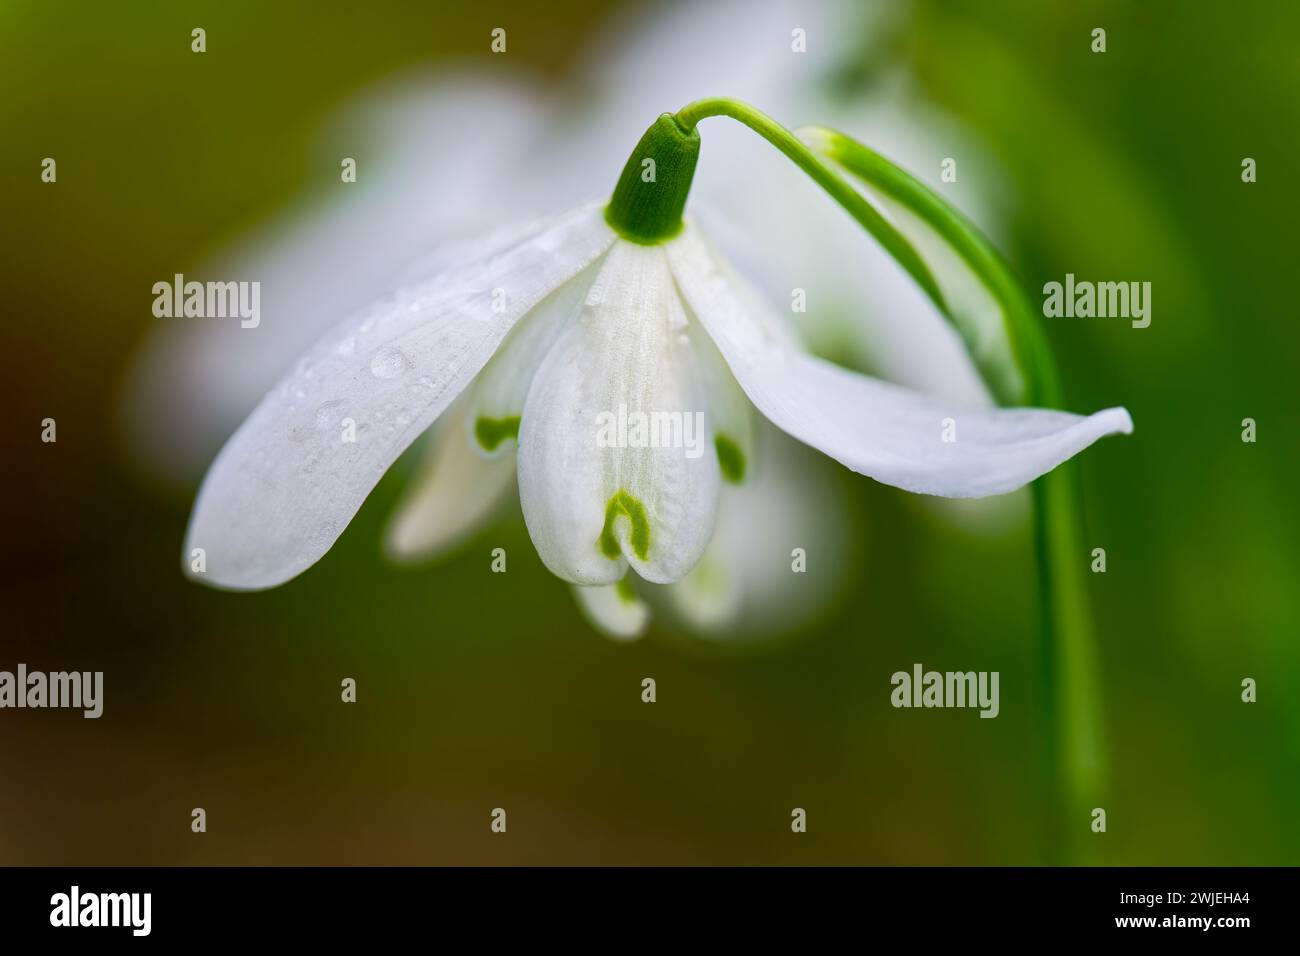 A close up of a single Snowdrop flower, (Galanthus nivalis) isolated against an out of focus background Stock Photo